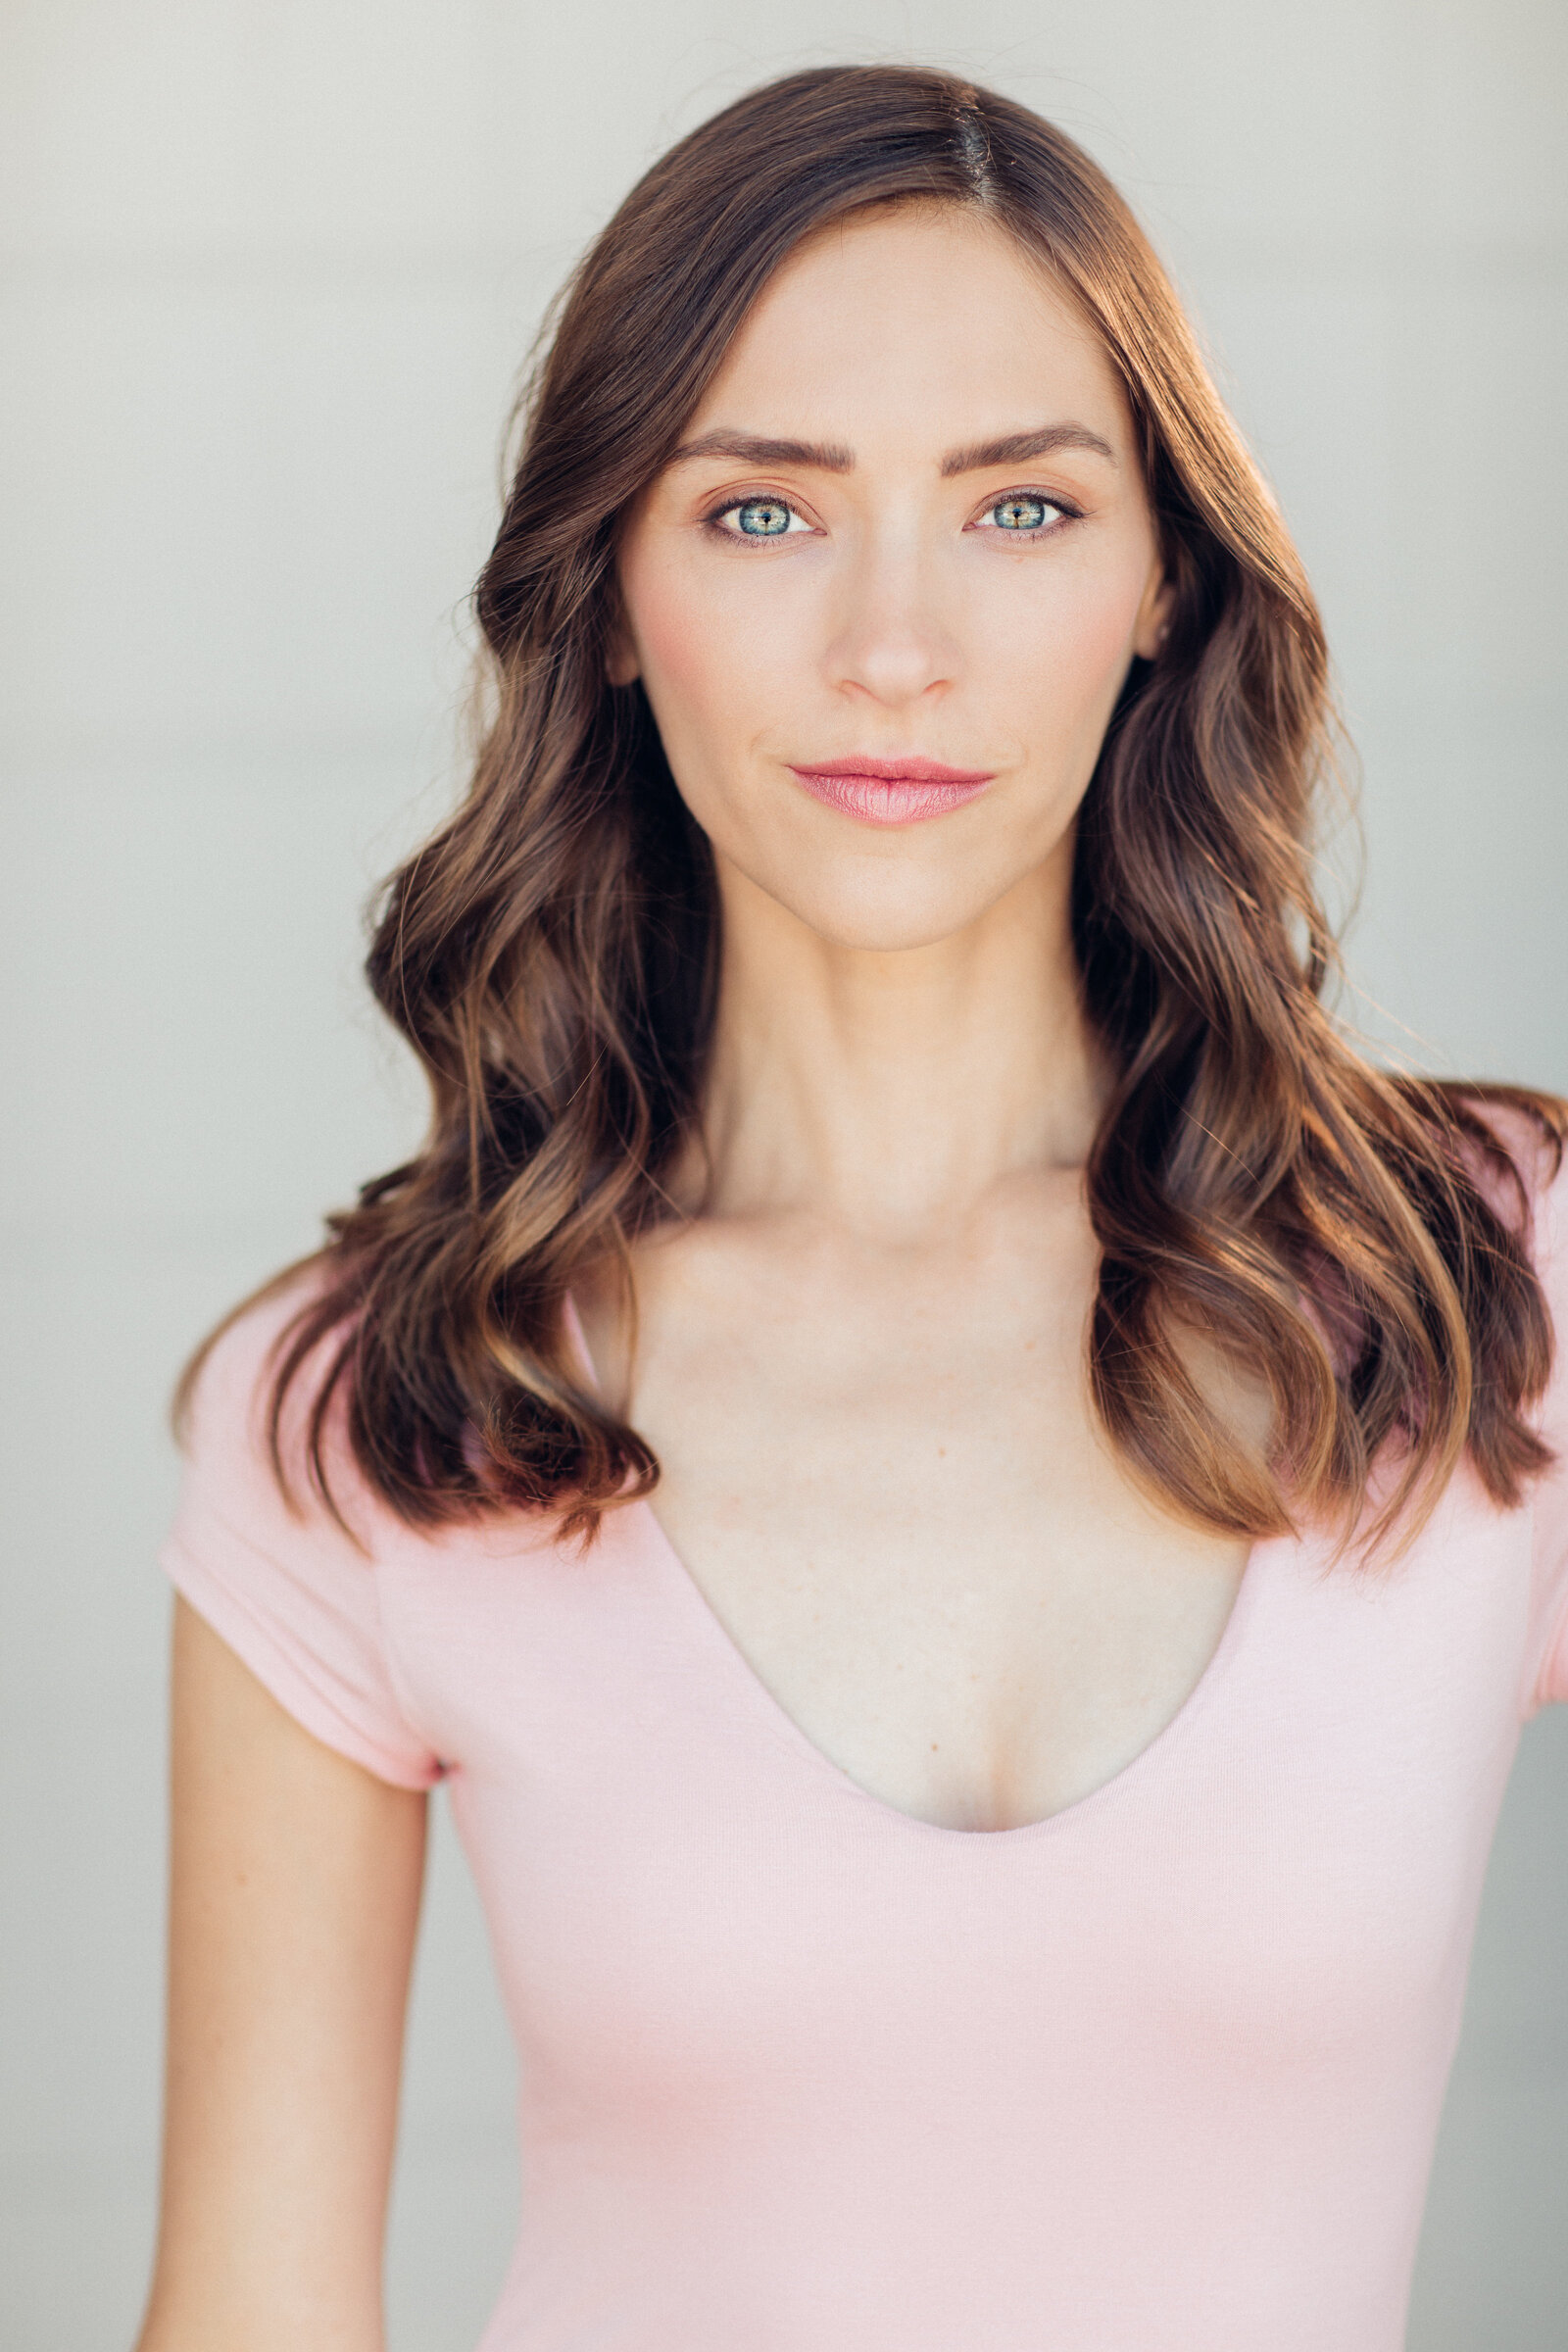 Headshot Photograph Of Young Woman In Pink V-Neck Shirt Los Angeles